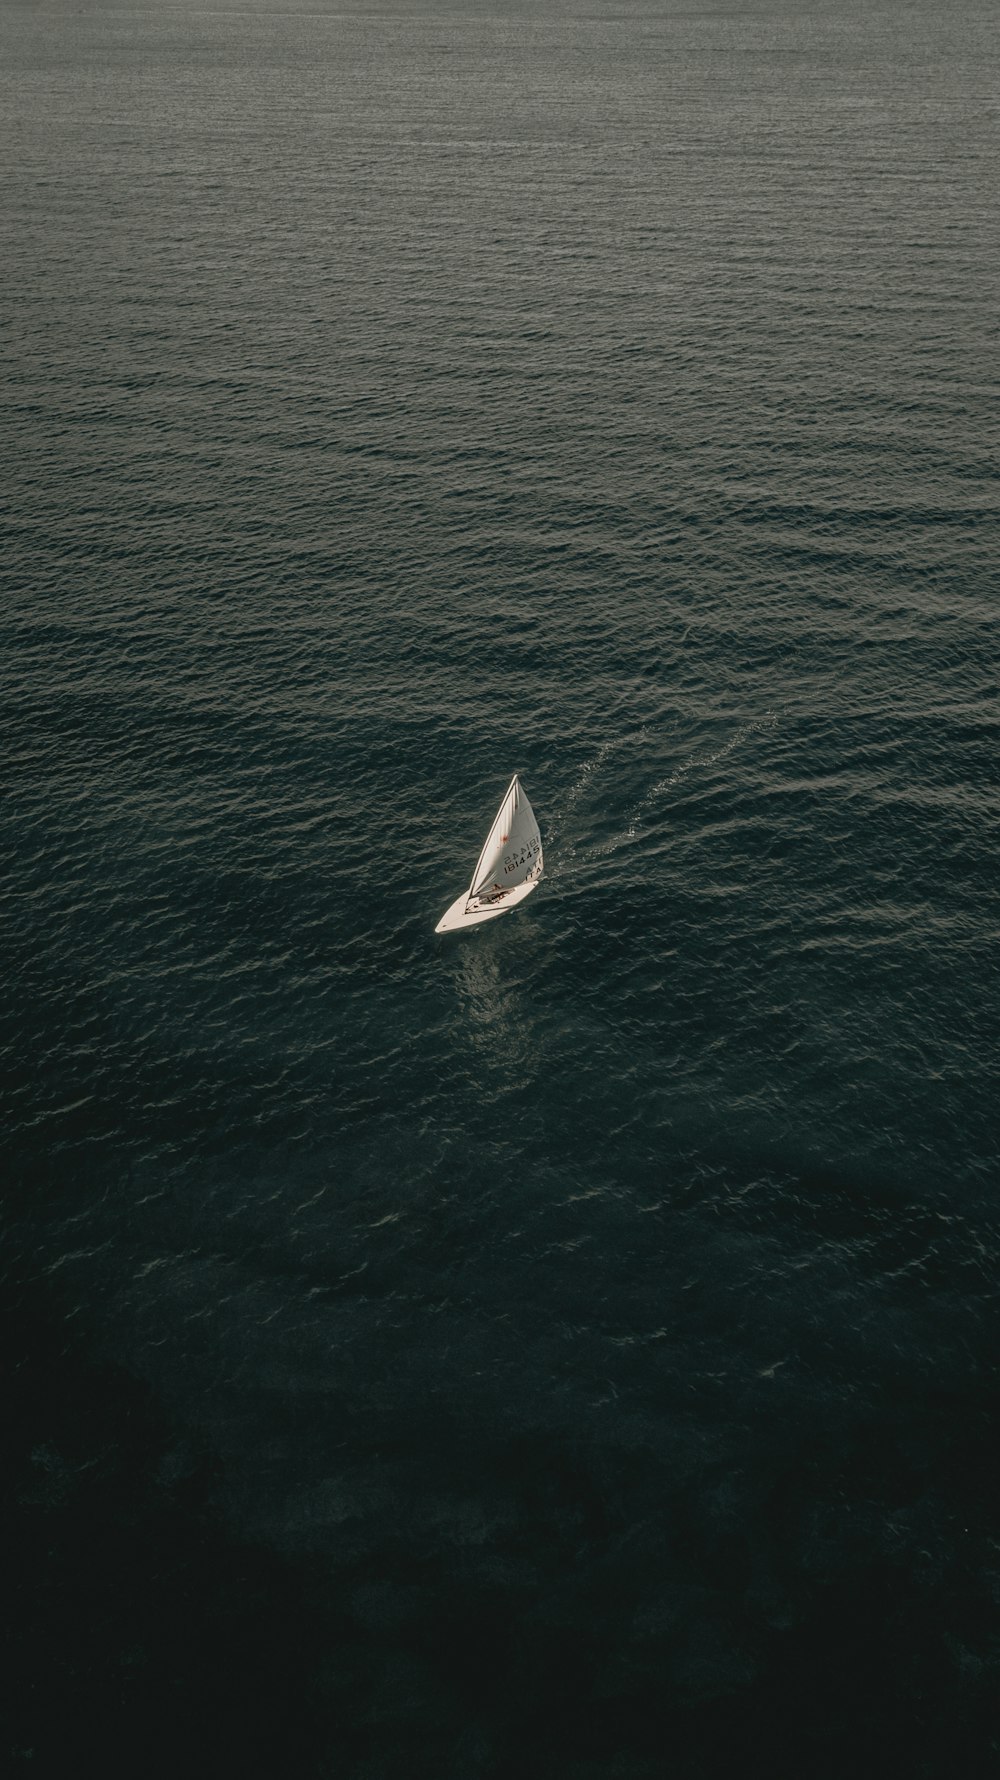 white sailing boat on body of water